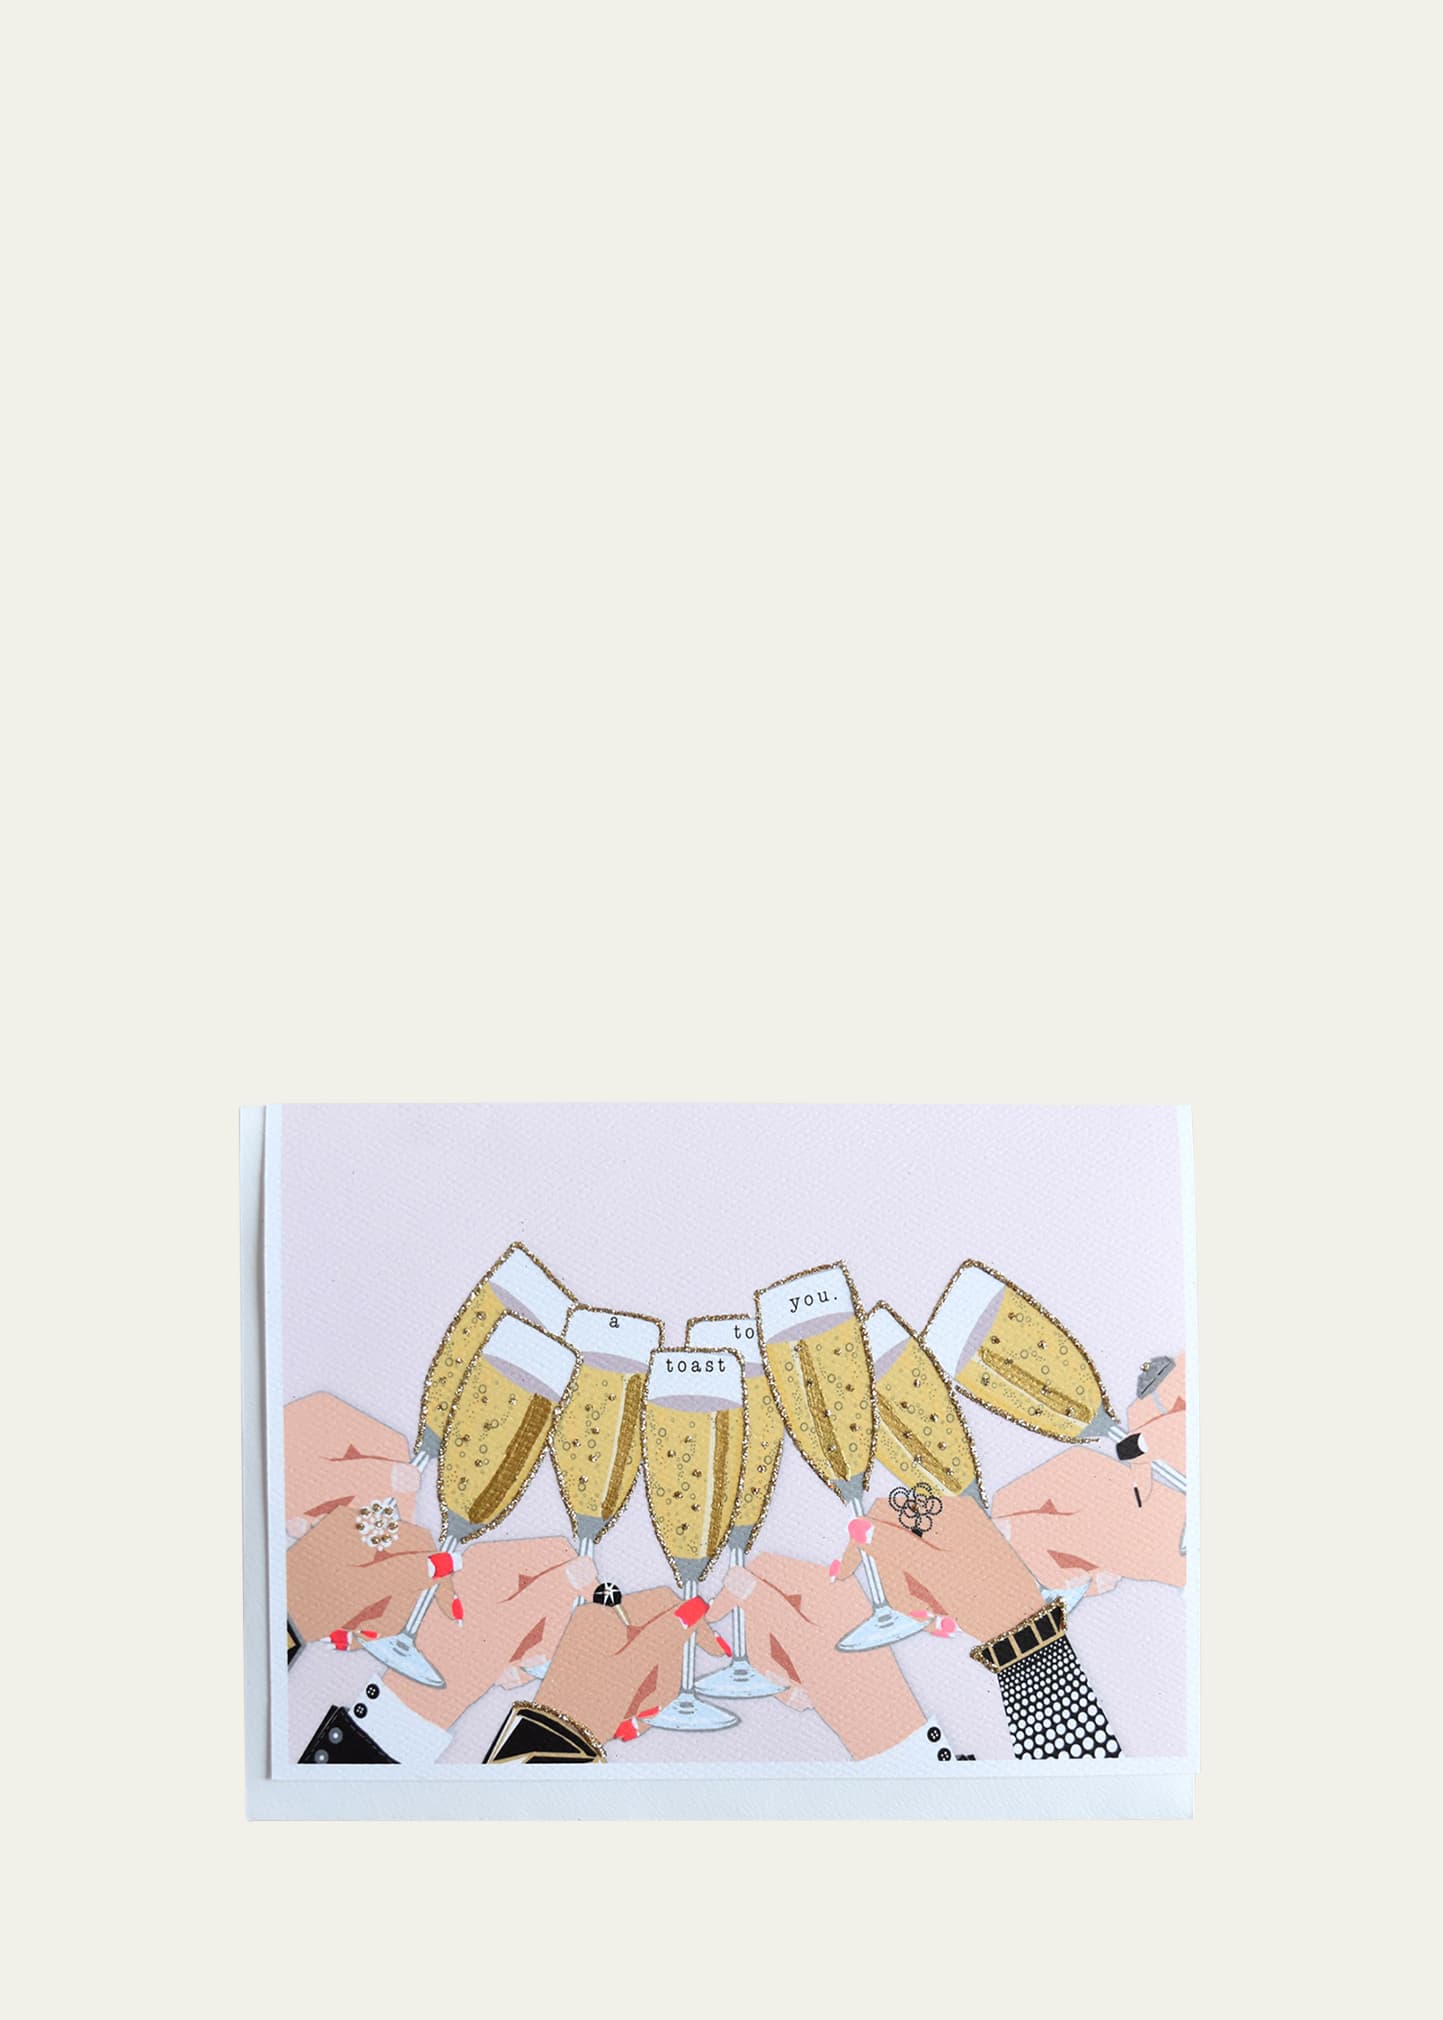 A Toast To You Greeting Card